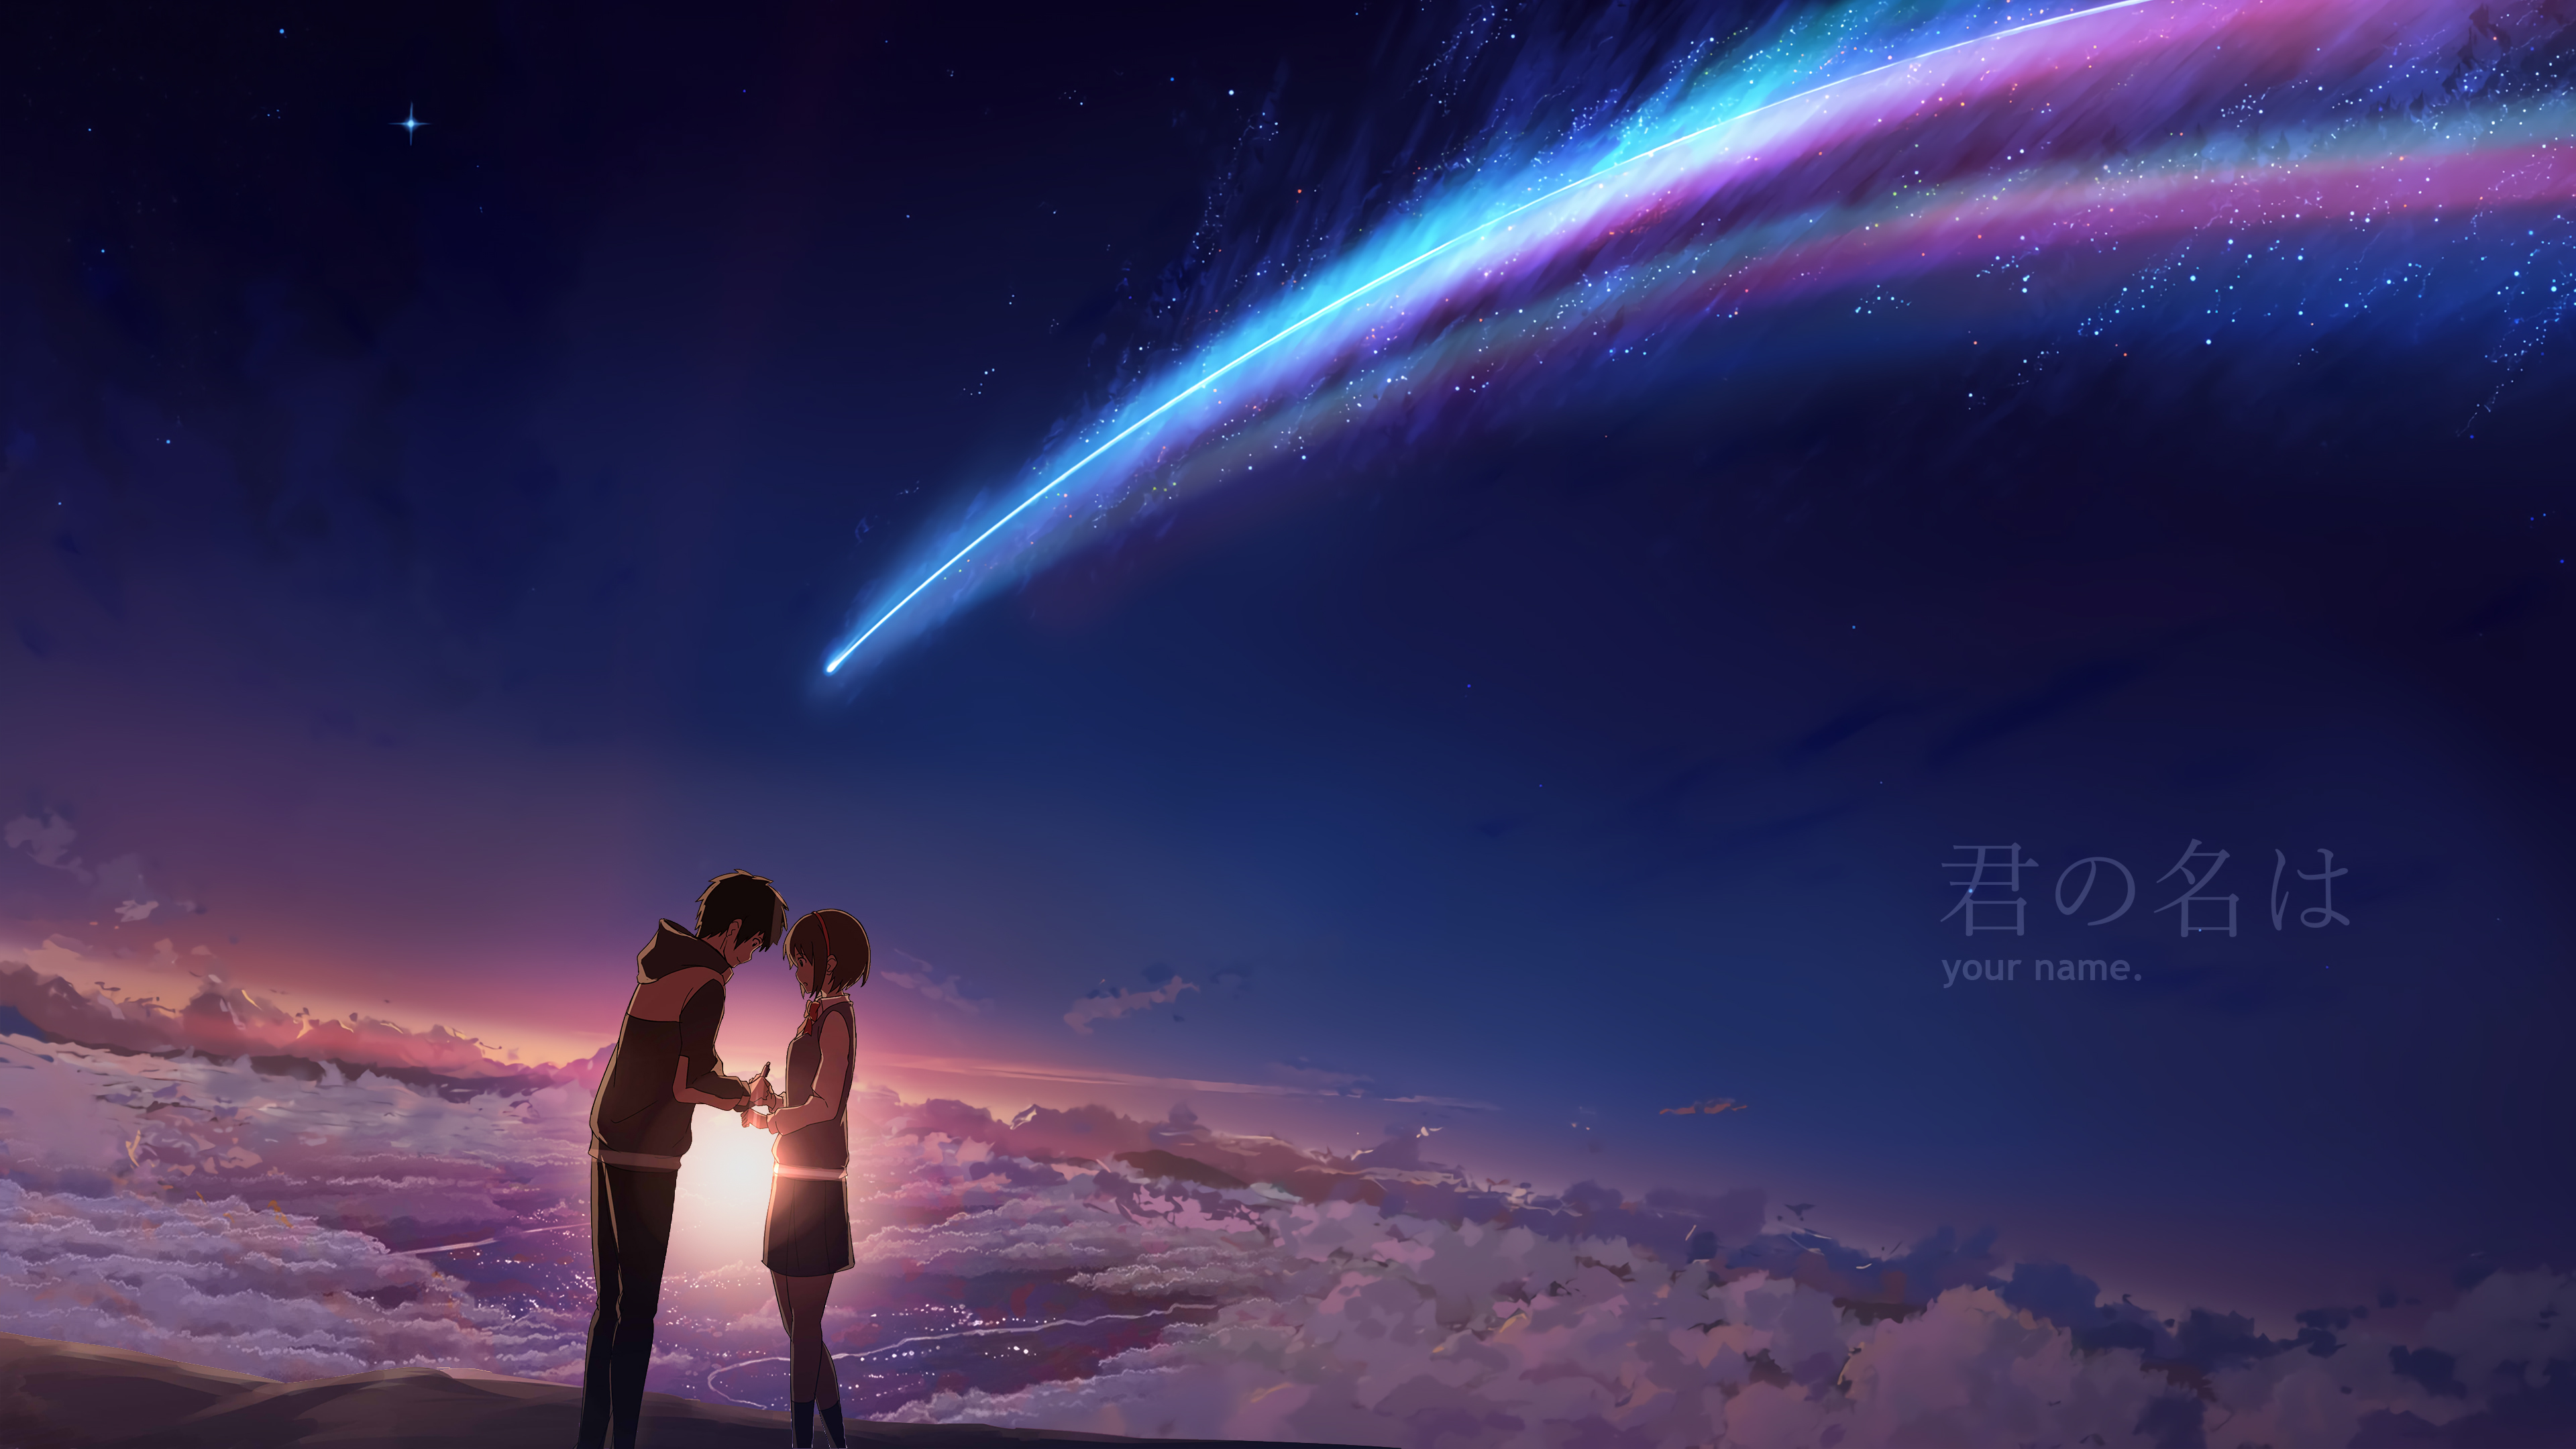 Your Name. Backgrounds, Compatible - PC, Mobile, Gadgets| 3840x2160 px